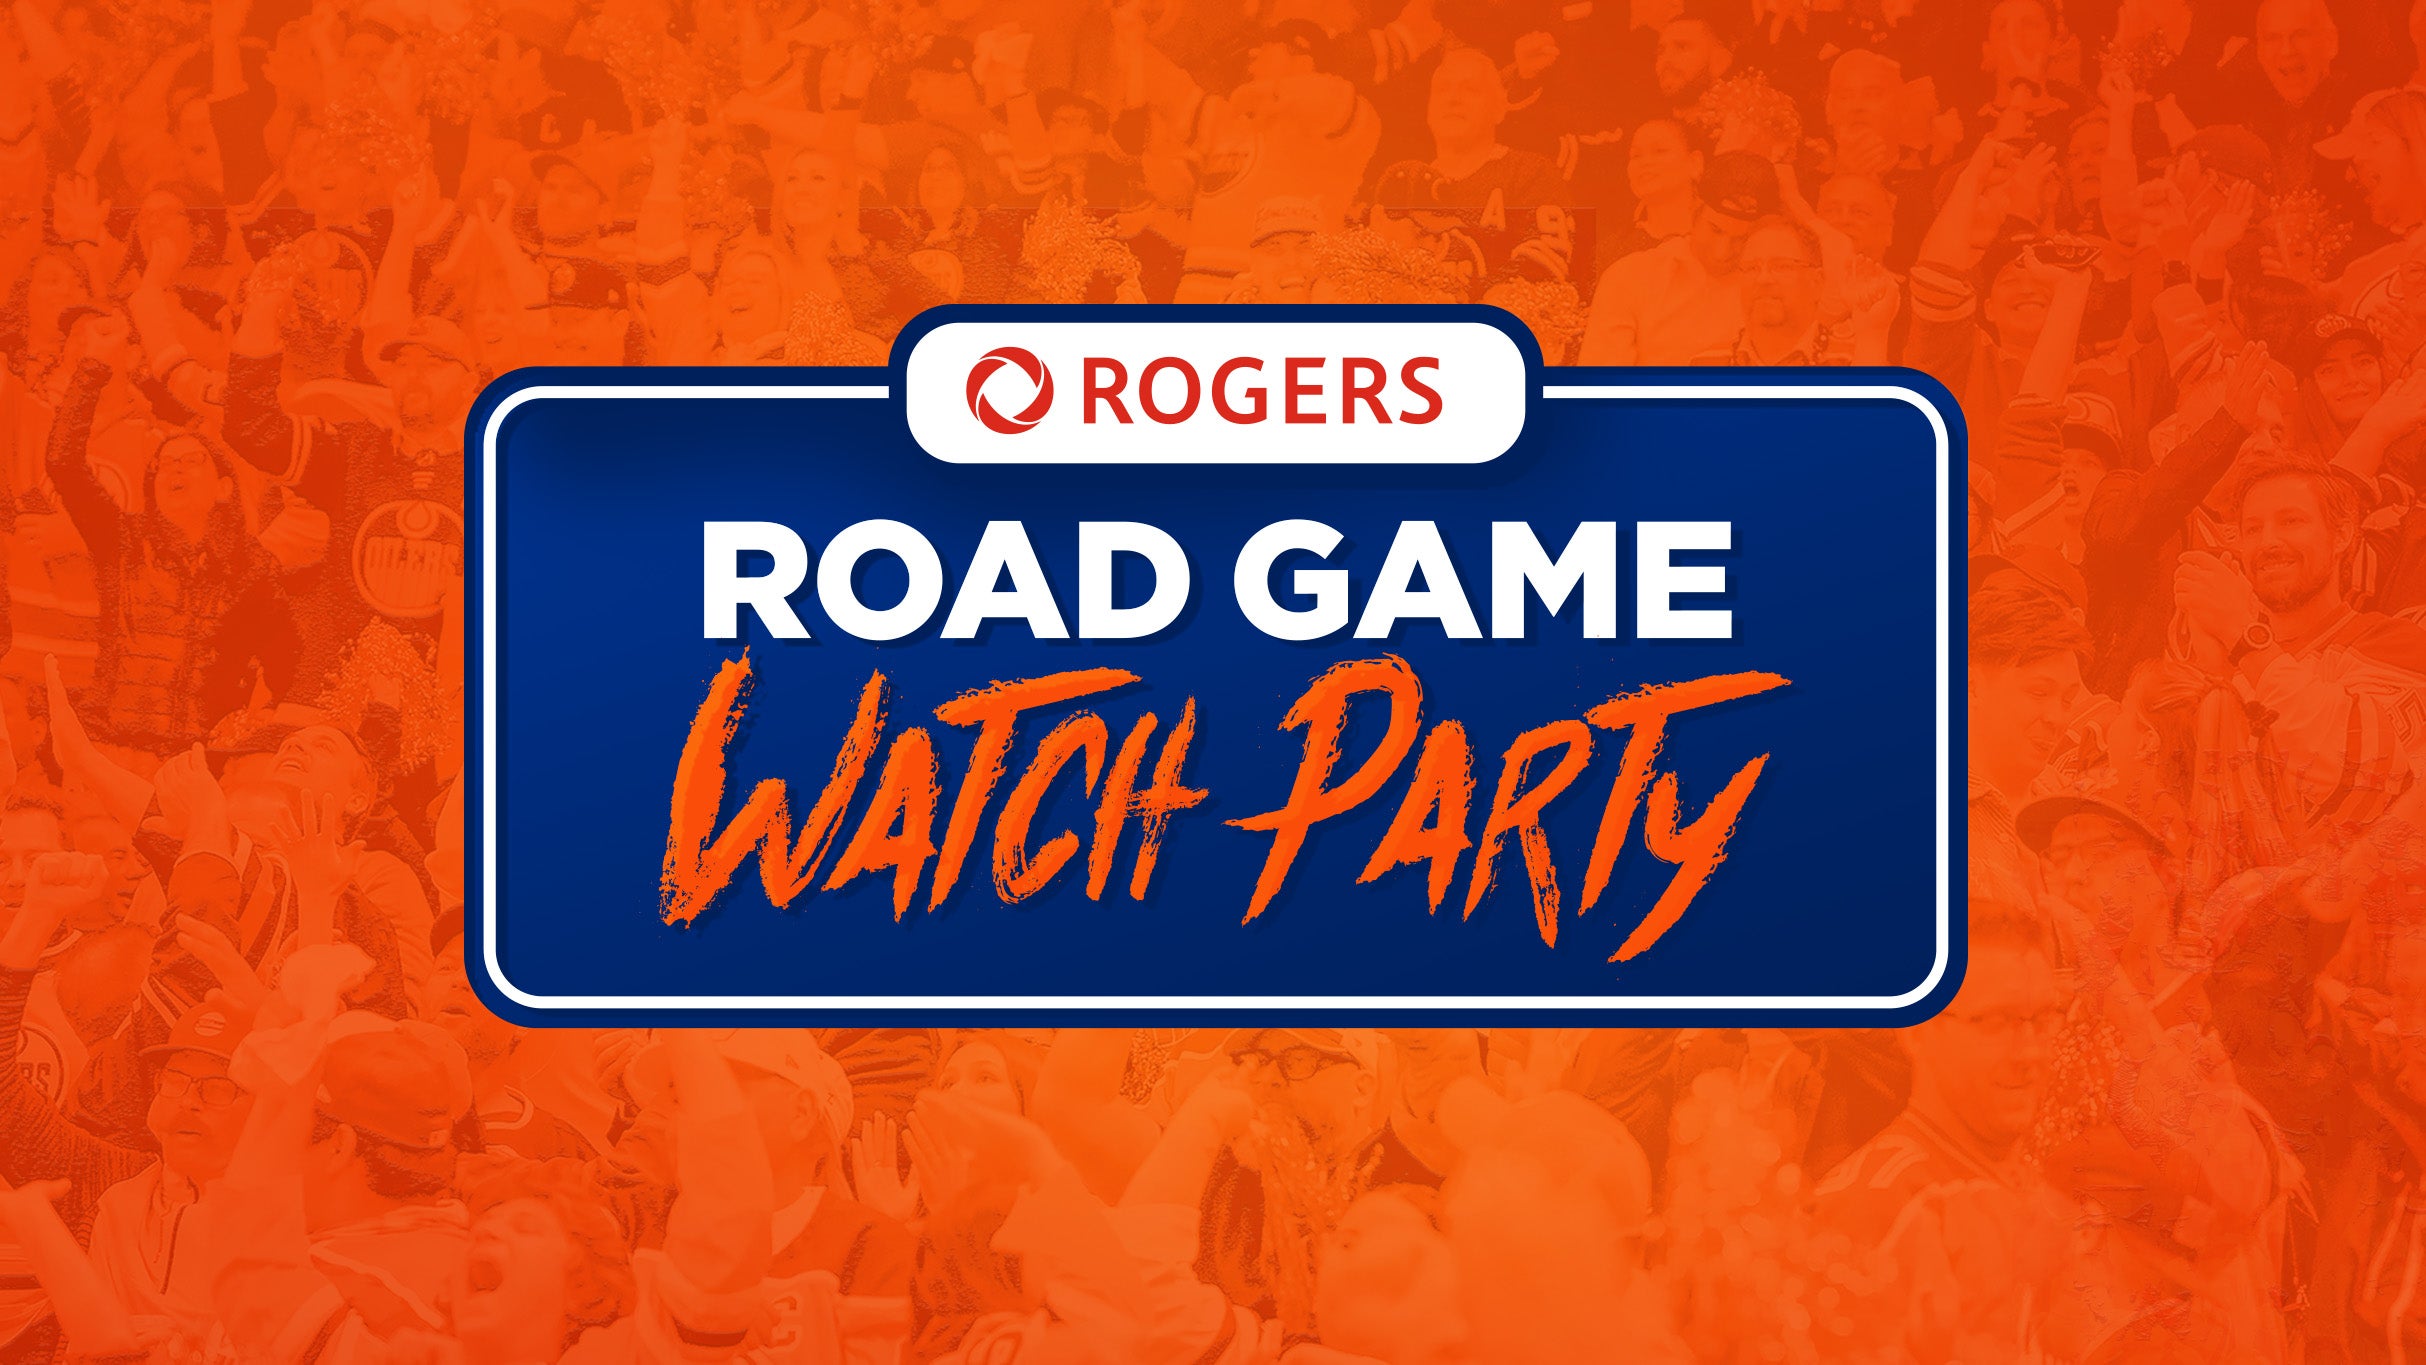 working presale code for Oilers Road Game Watch Party - Edmonton Oilers v. Vegas Golden Knights advanced tickets in Edmonton at Rogers Place